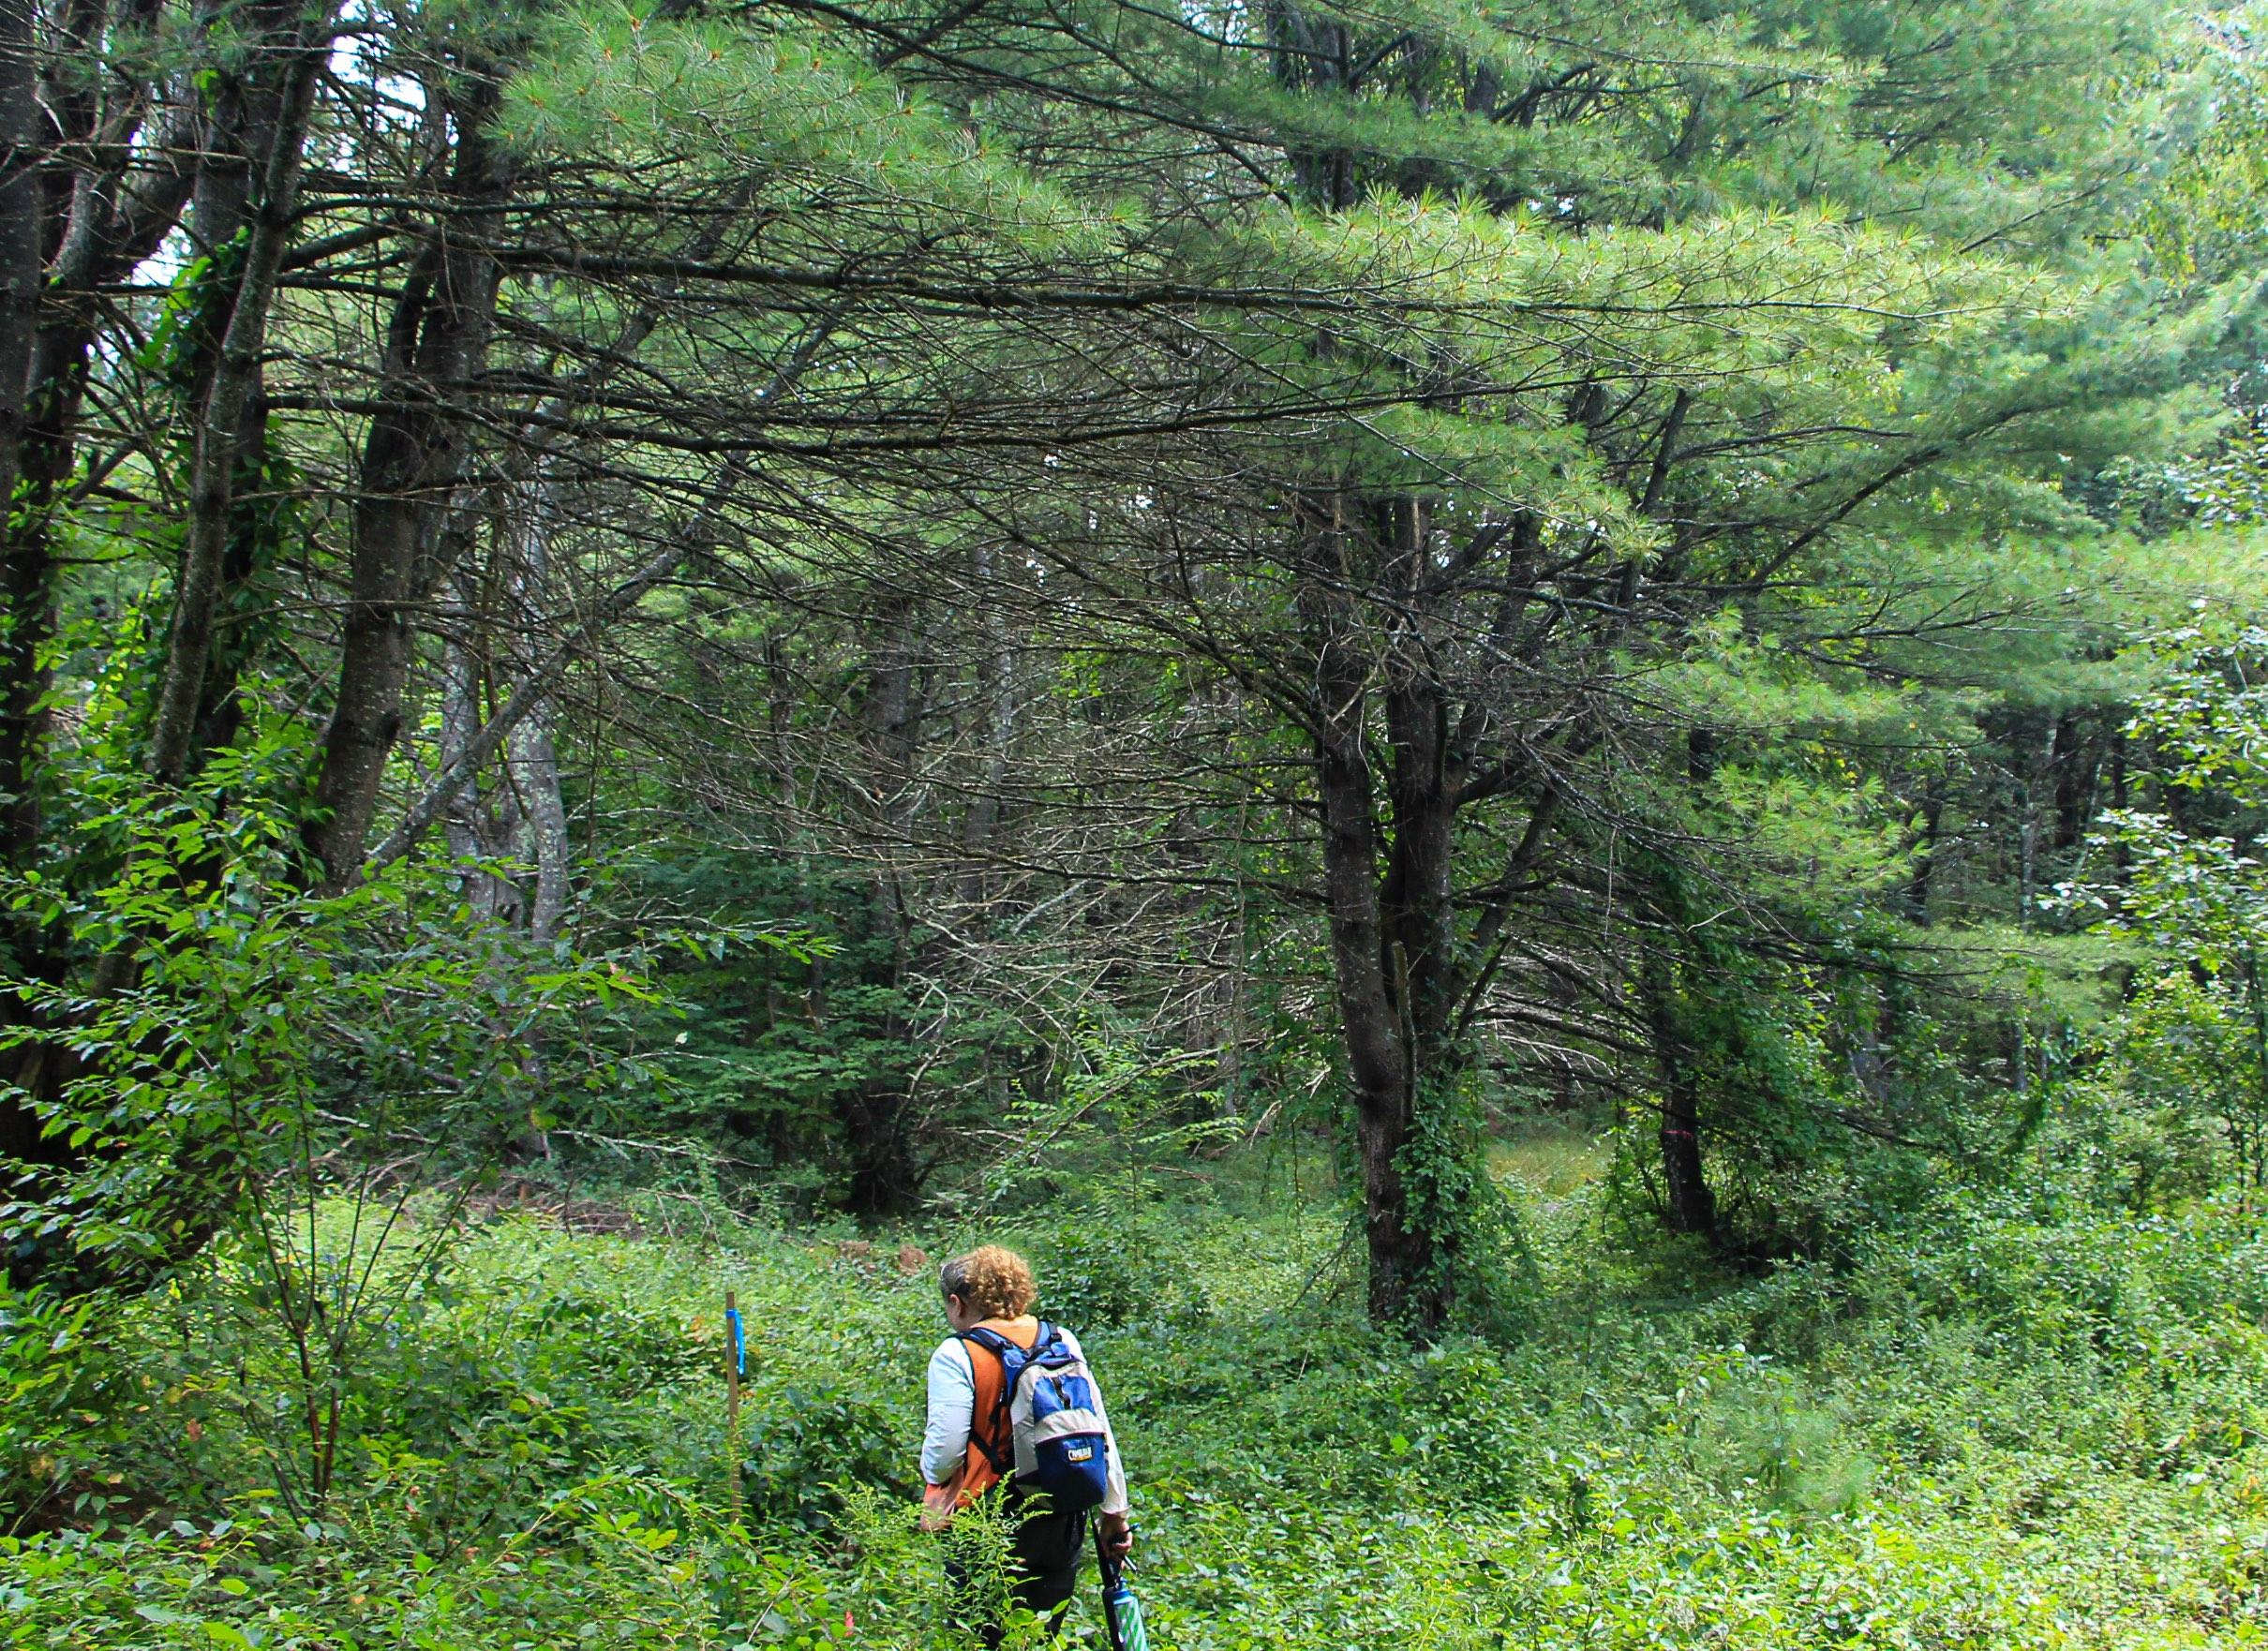 A woman wearing a blue backpack walks through a thicket of vegetation 